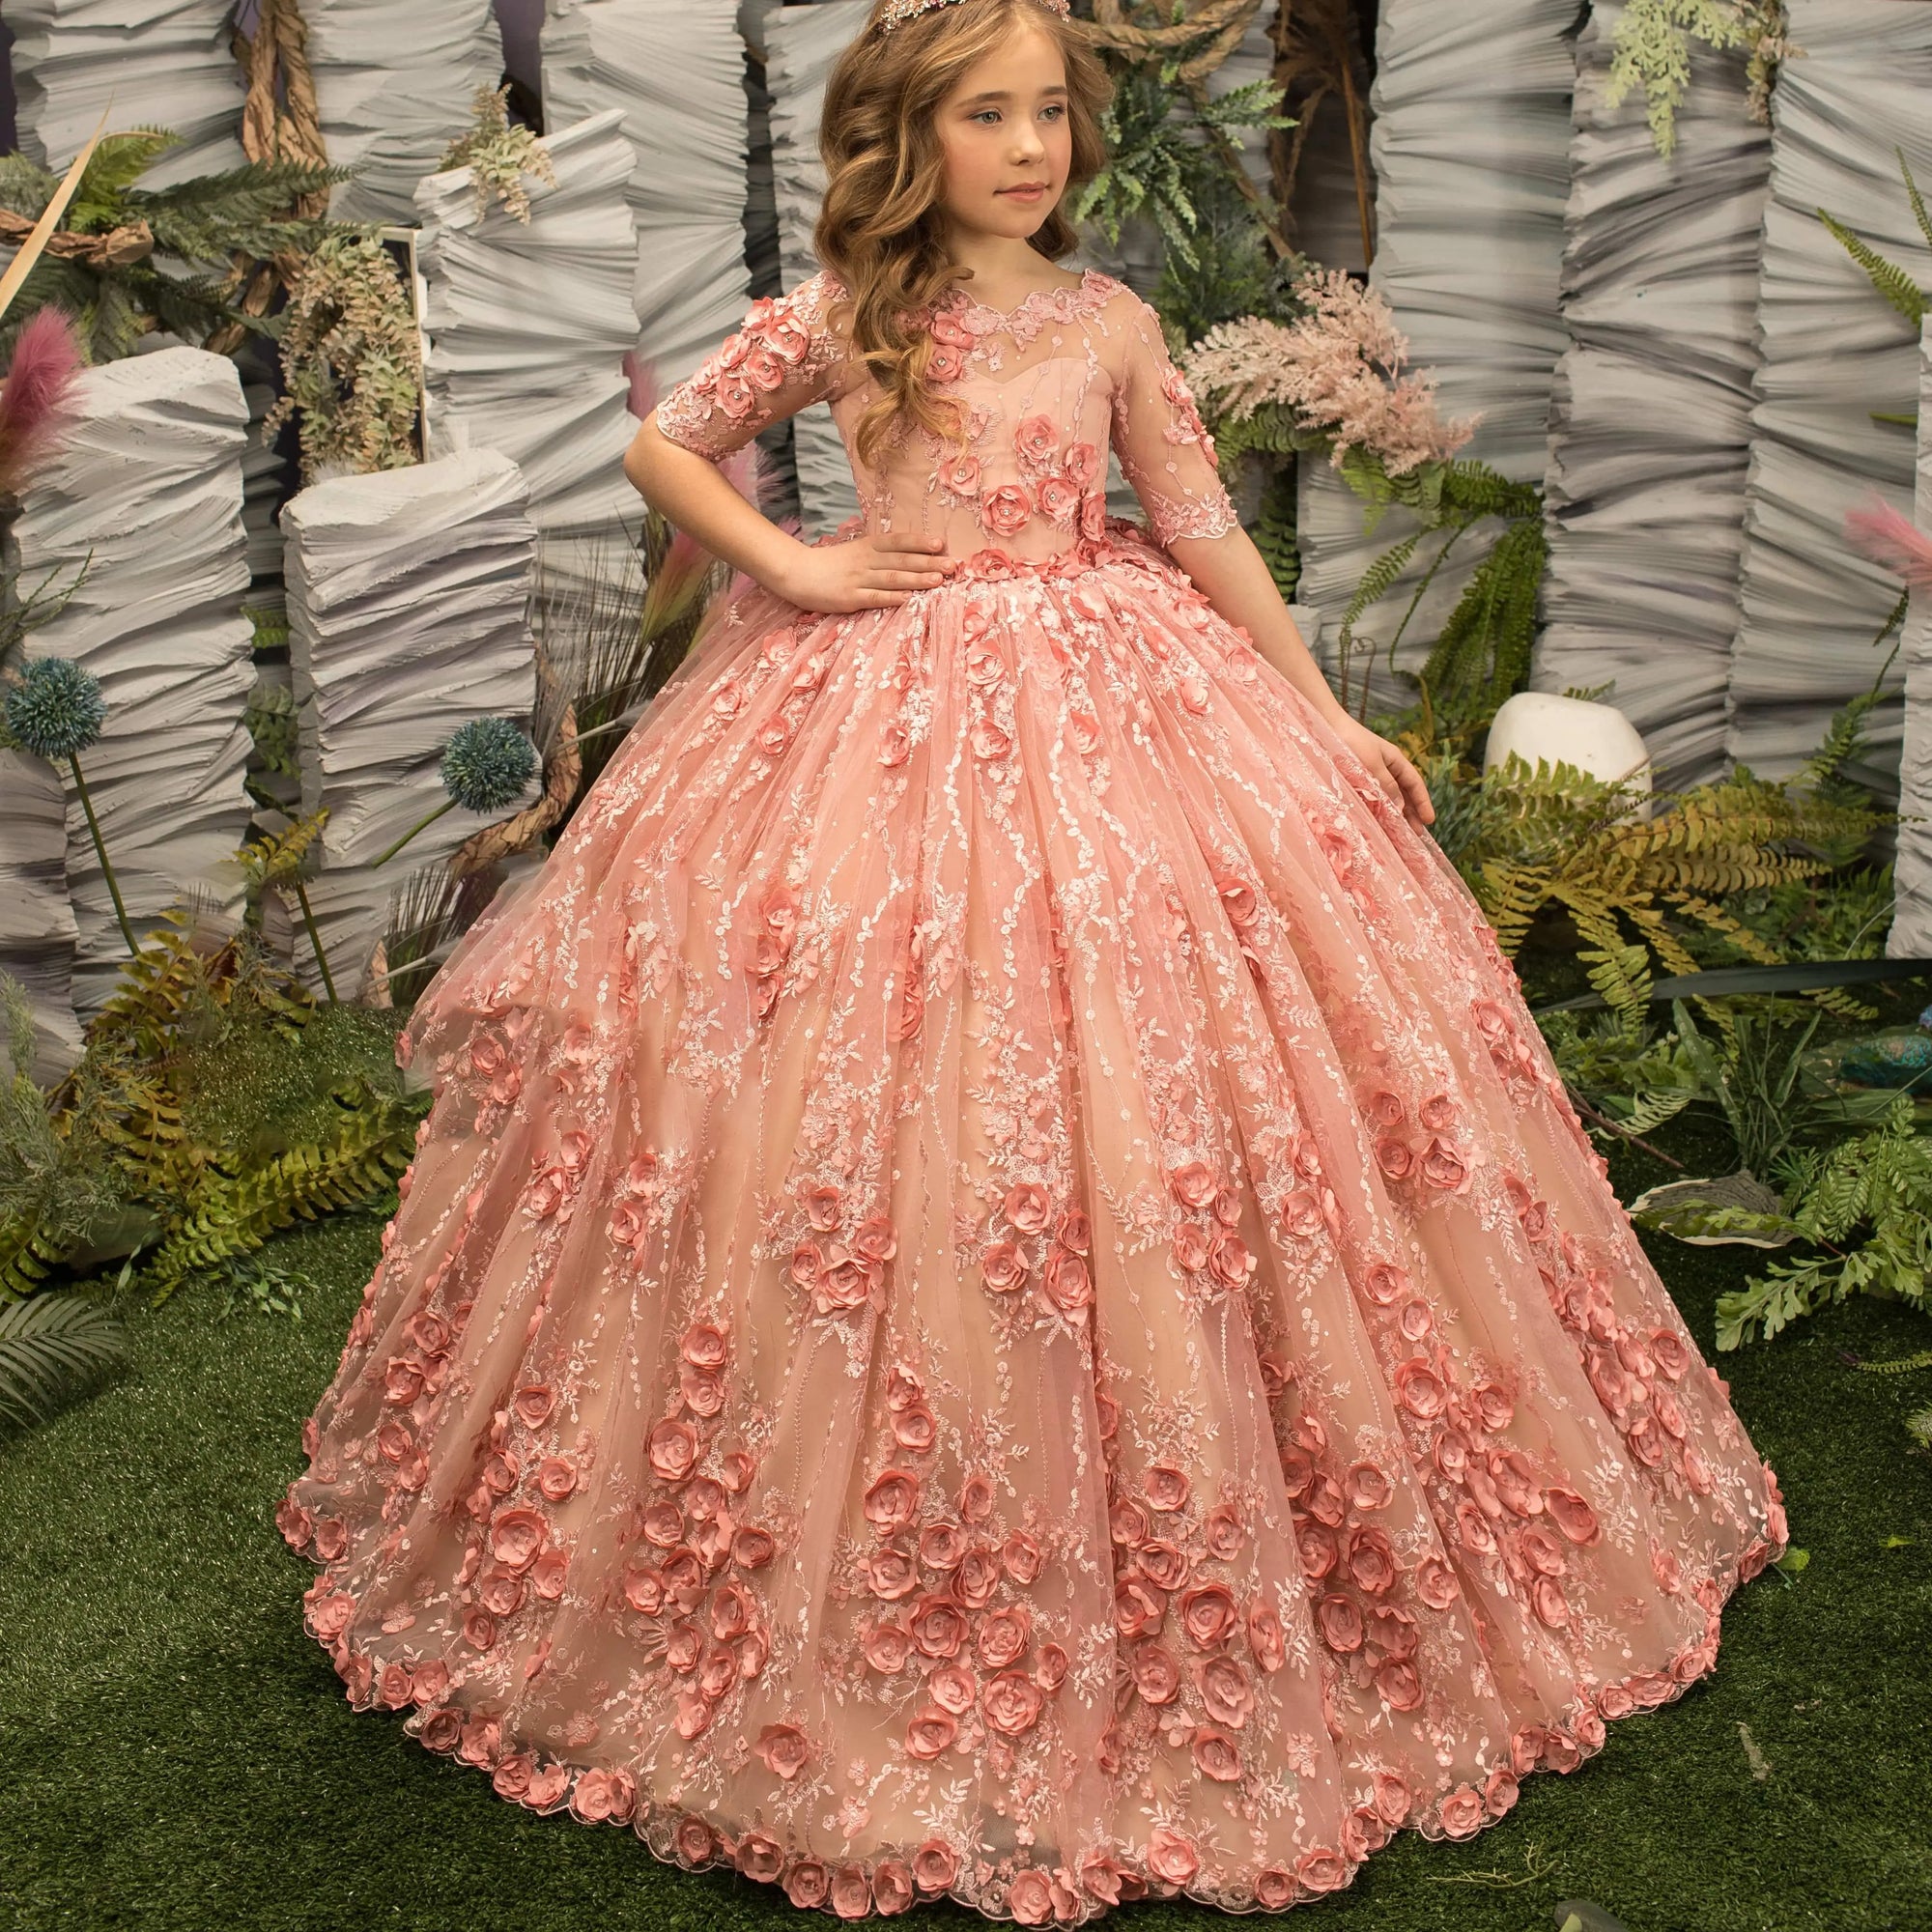 Princess Luscious Tulle Fluffy Skirt Girls Party Dress